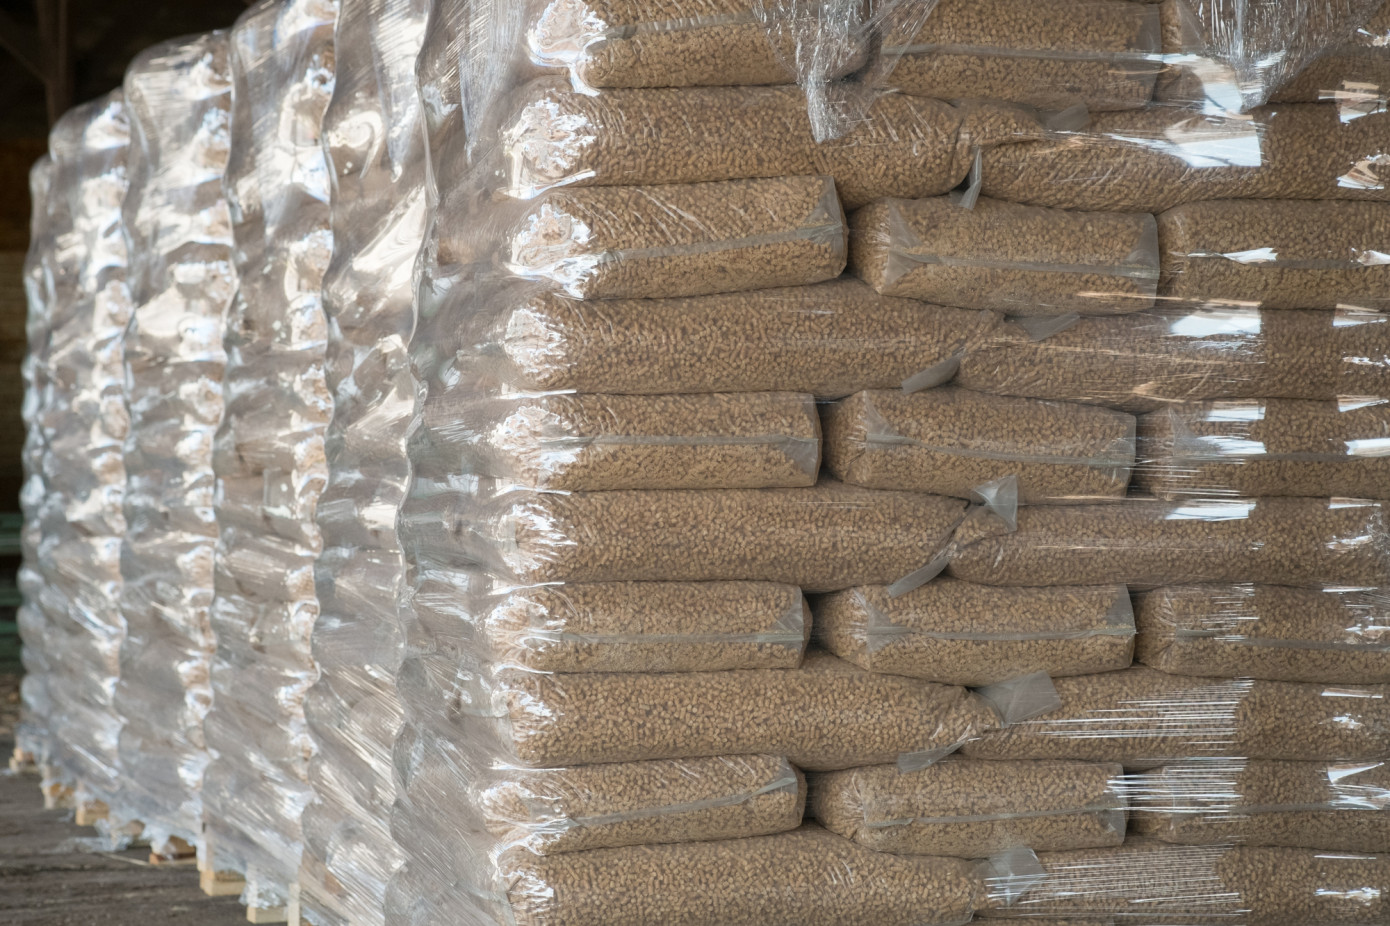 In September, export price for wood pellets from Canada slides 1.1%